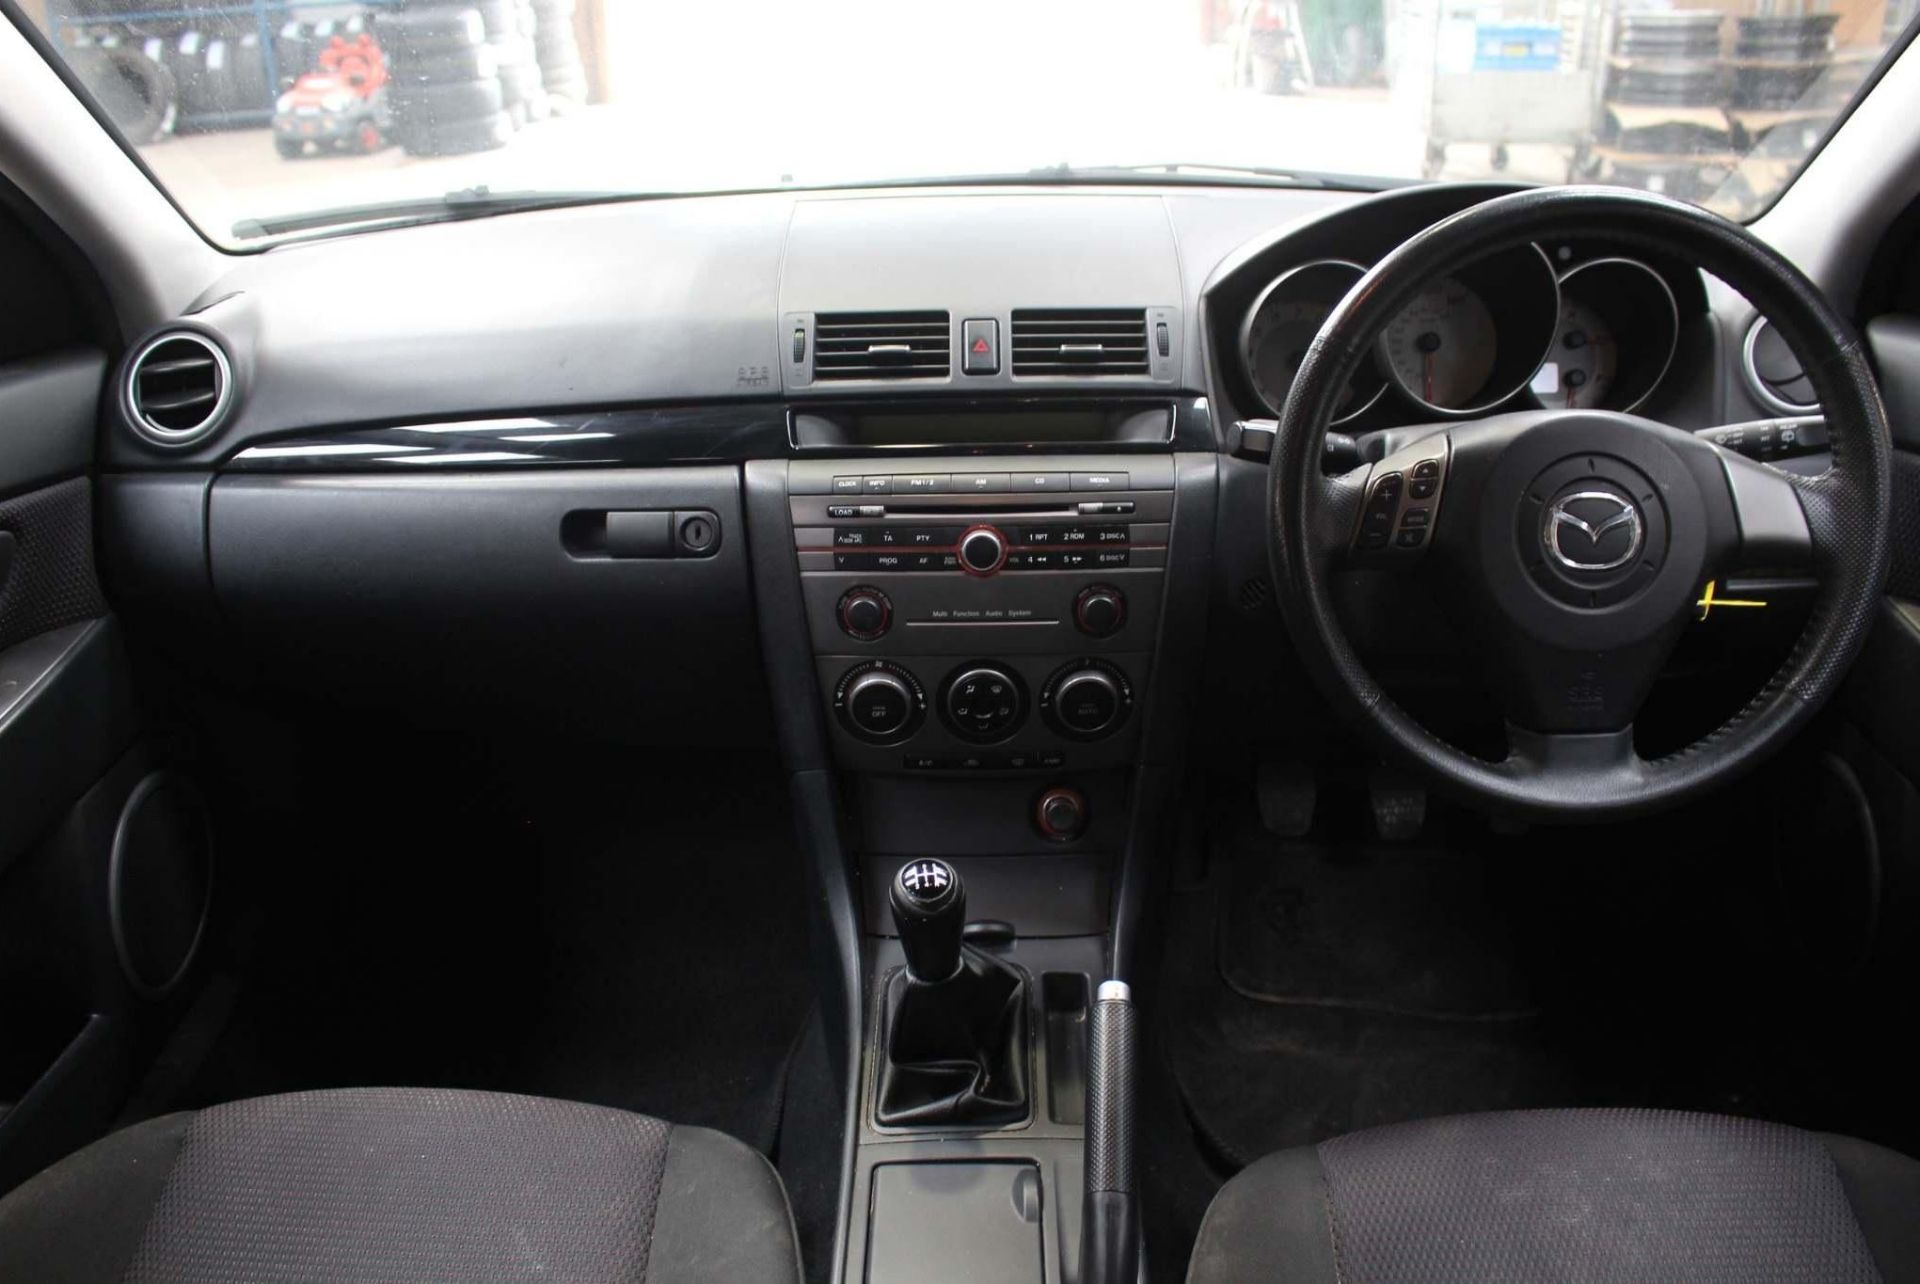 2007 Mazda3 1.6 TS2 5dr Hatchback - CL505 - NO VAT ON THE HAMMER - Location: Corby, Northamptonshire - Image 11 of 15